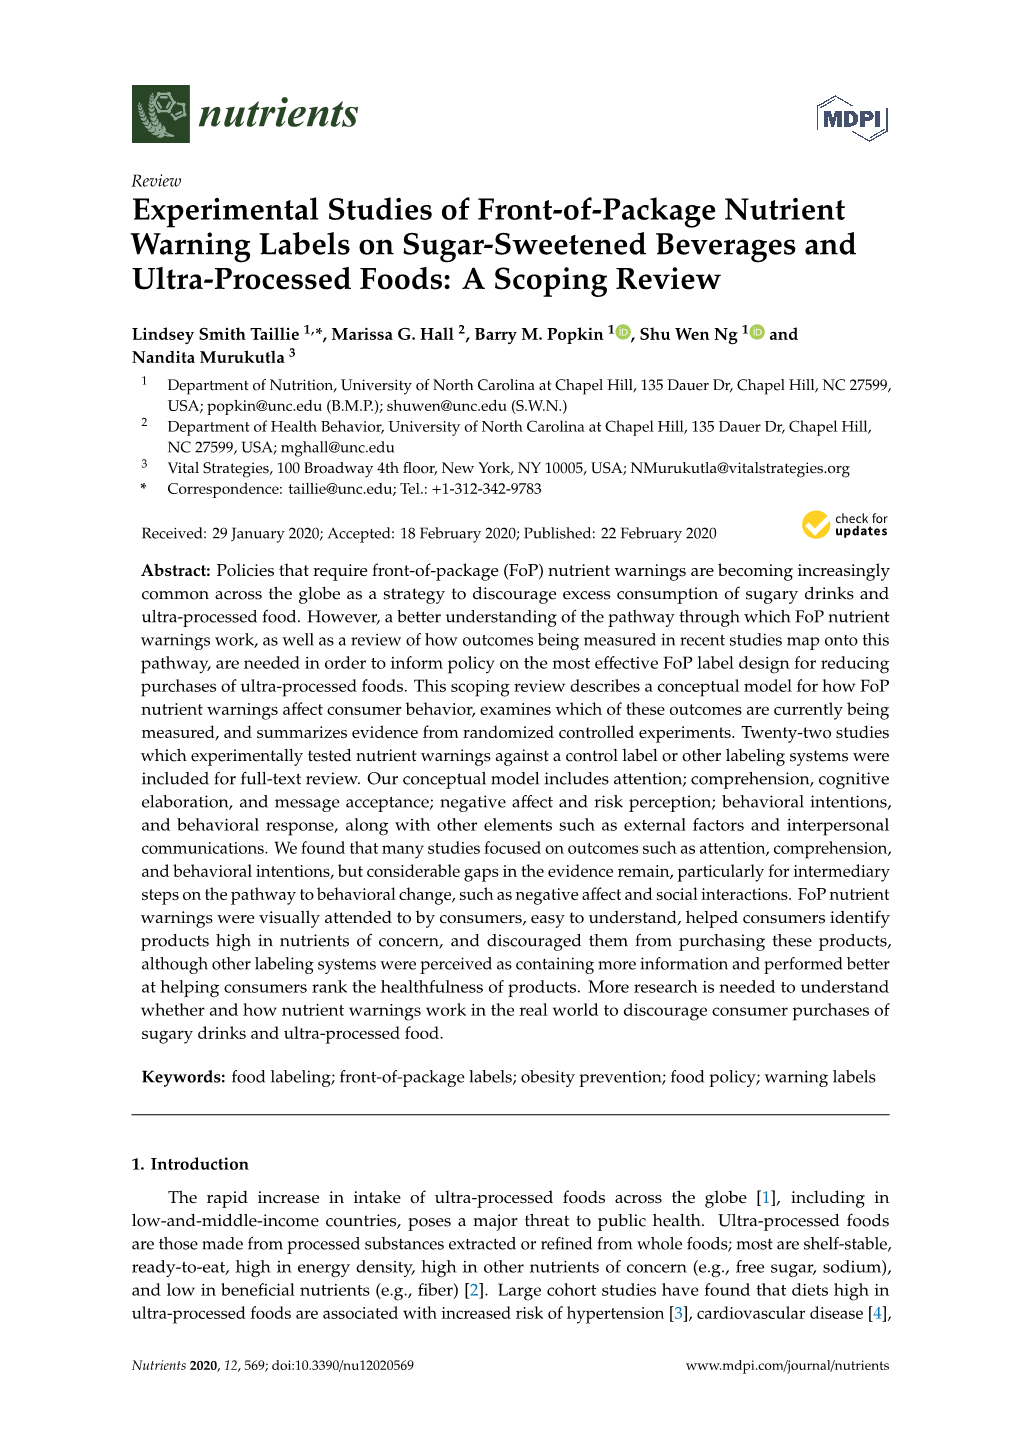 Experimental Studies of Front-Of-Package Nutrient Warning Labels on Sugar-Sweetened Beverages and Ultra-Processed Foods: a Scoping Review